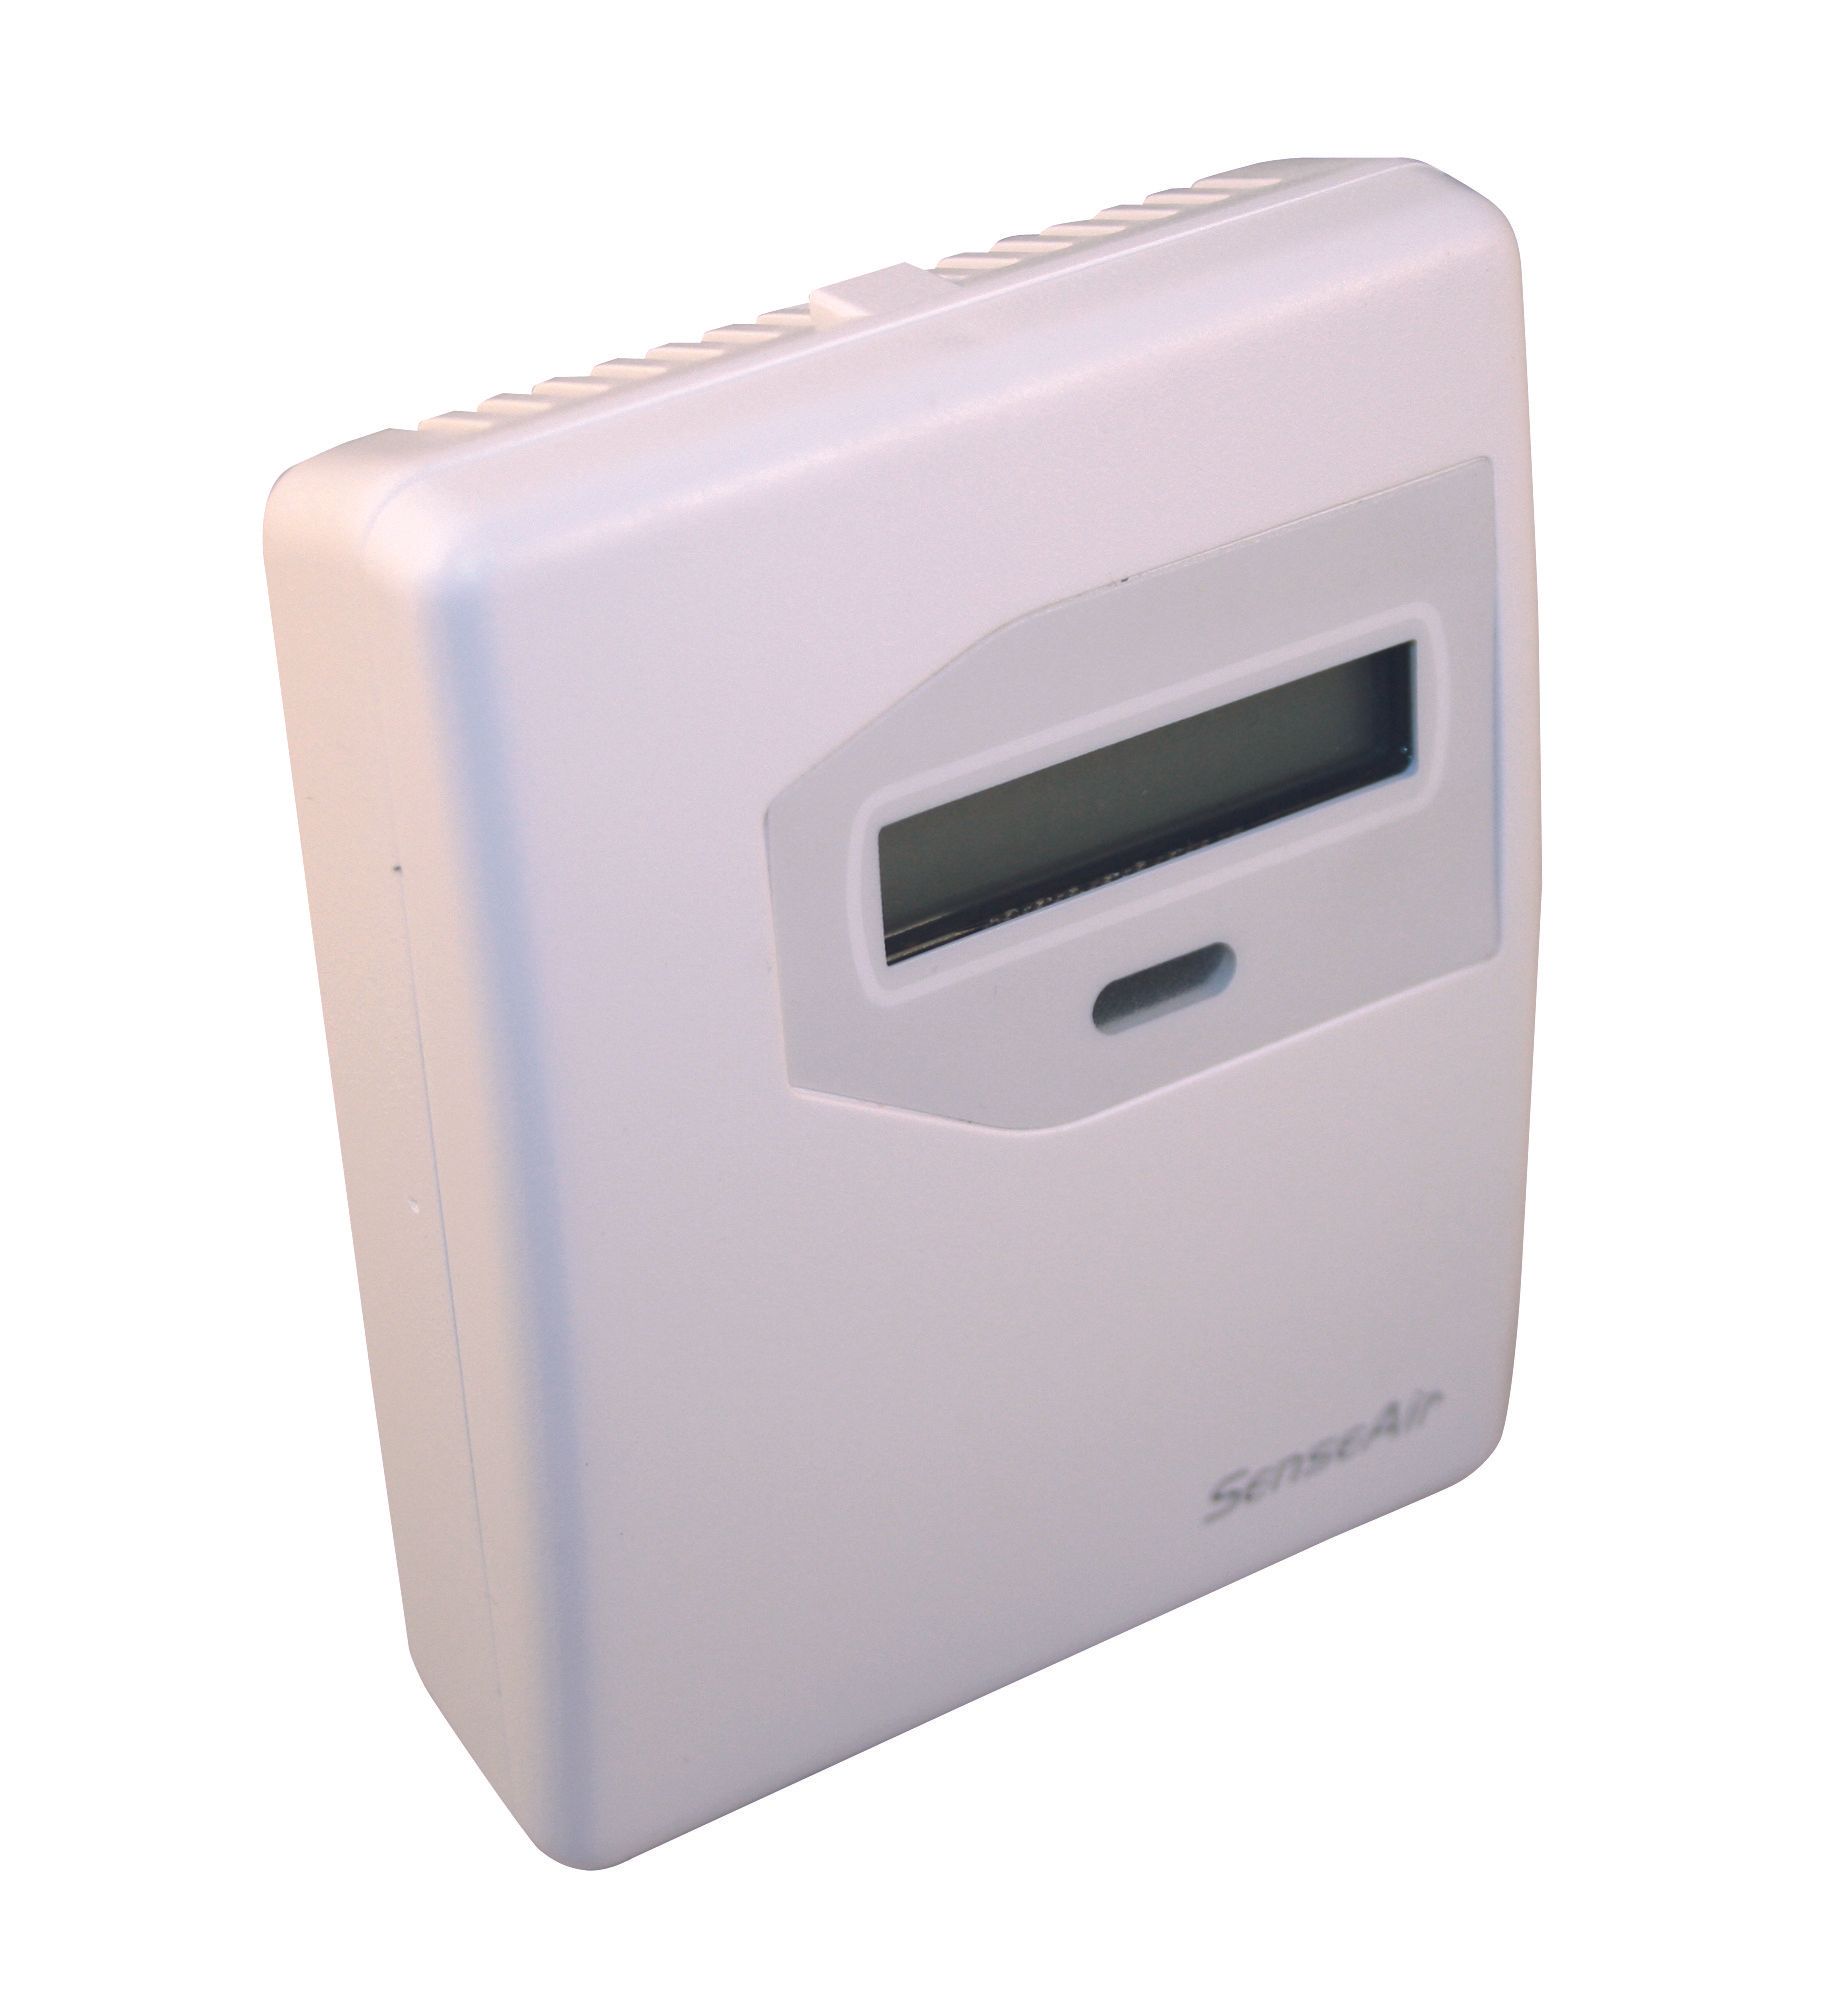 A simple CO2 room sensor (no temperature connector) with a digital display. IP30 rated.